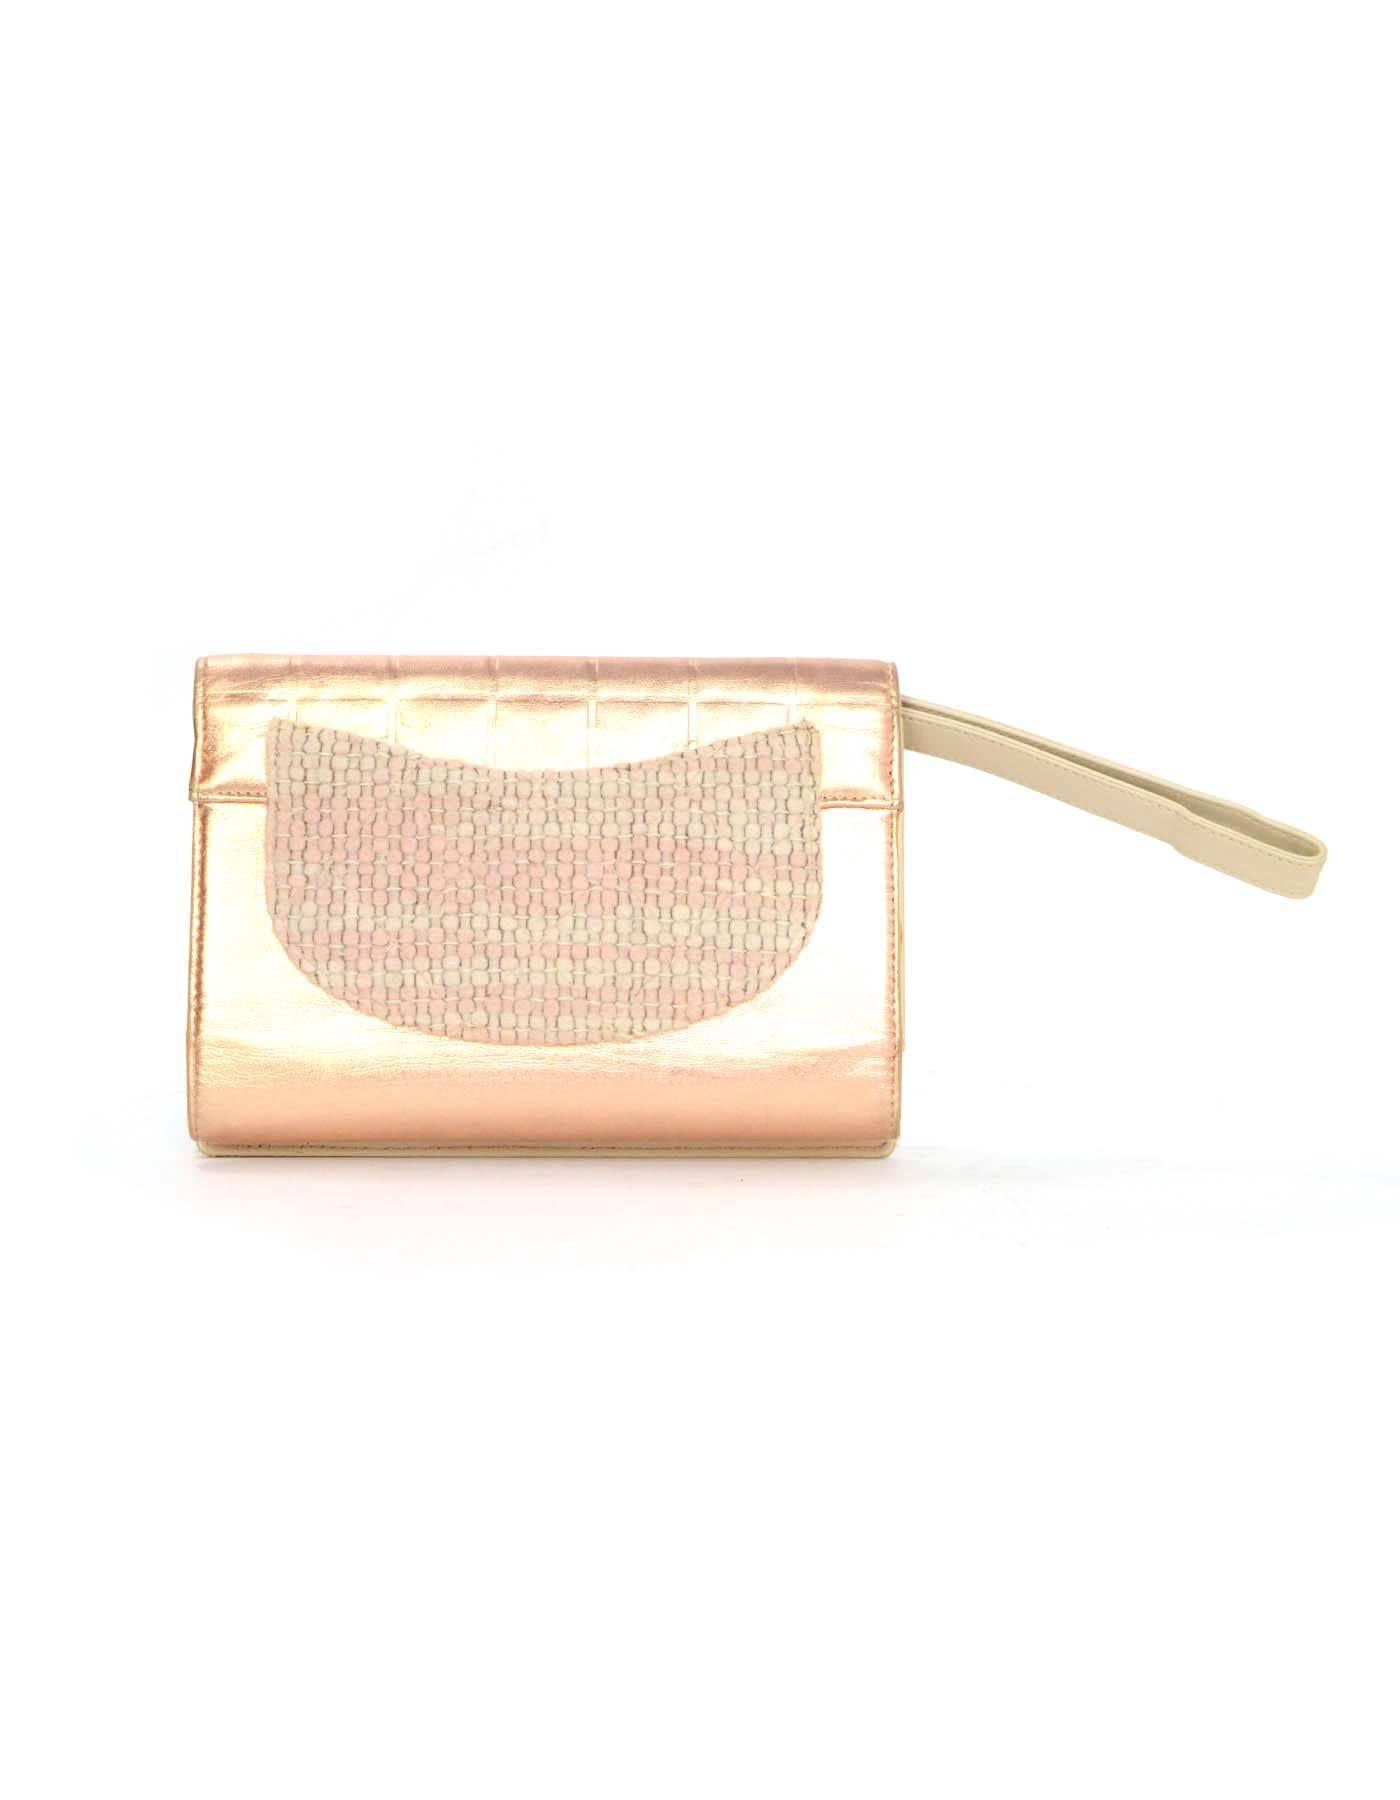 Chanel Metallic Peach Tweed Wristlet Clutch Bag GHW In Excellent Condition In New York, NY